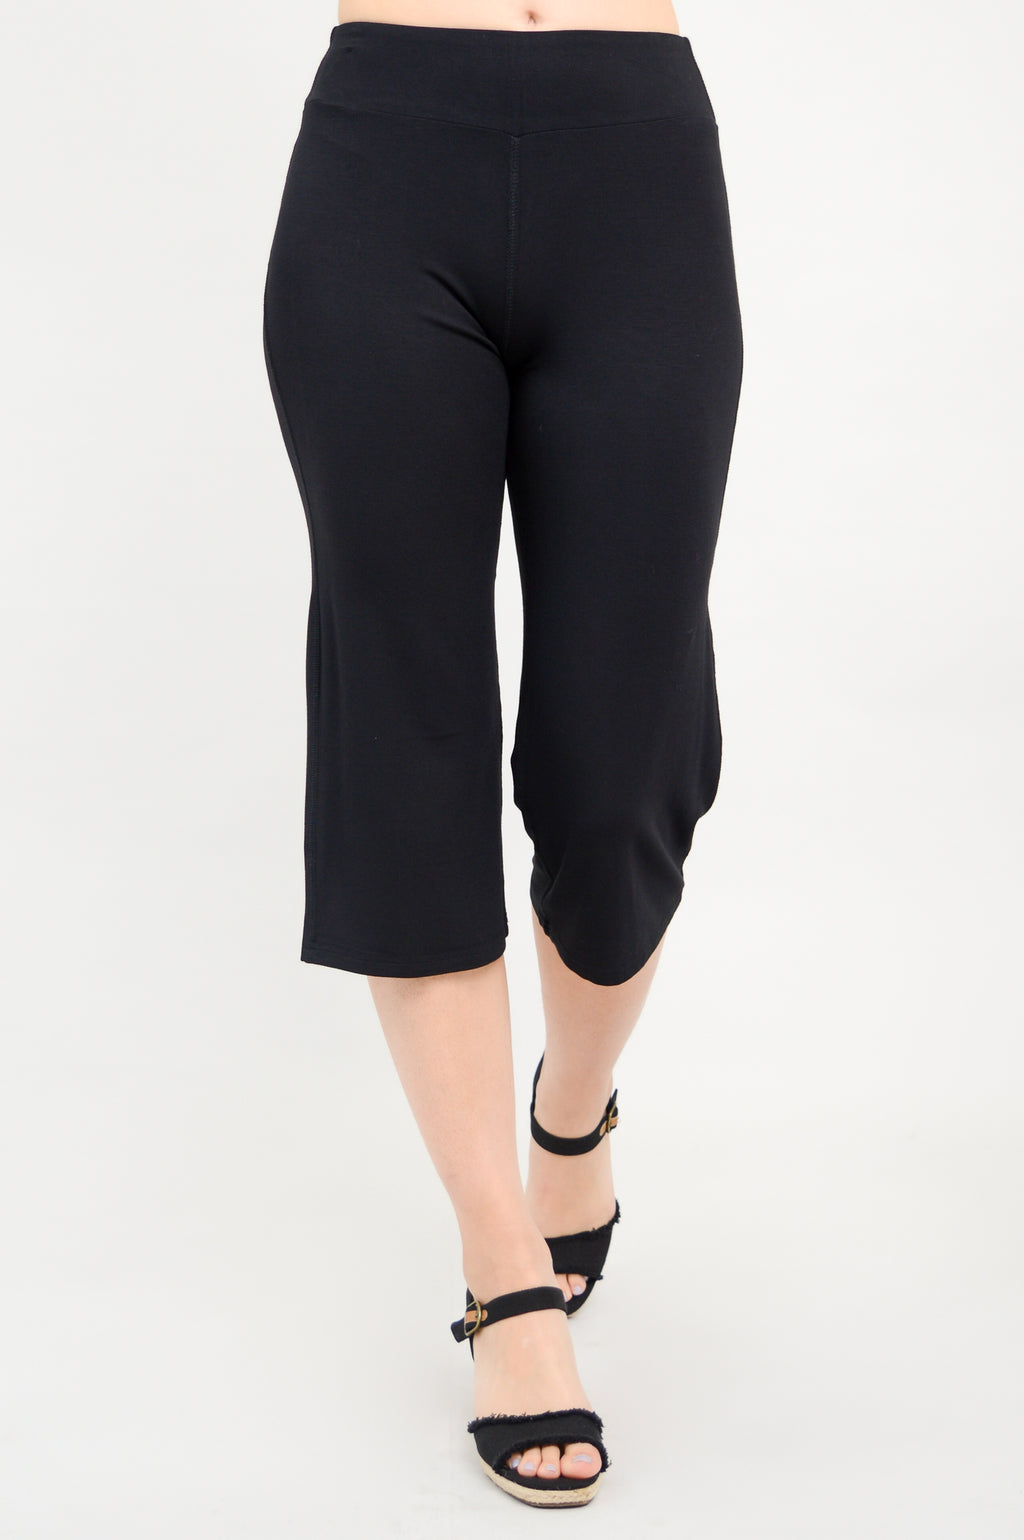 Solid Black Capri with Yoga Band - Soft, comfortable leggings. Beautiful  designs and patterns. – OOLALA